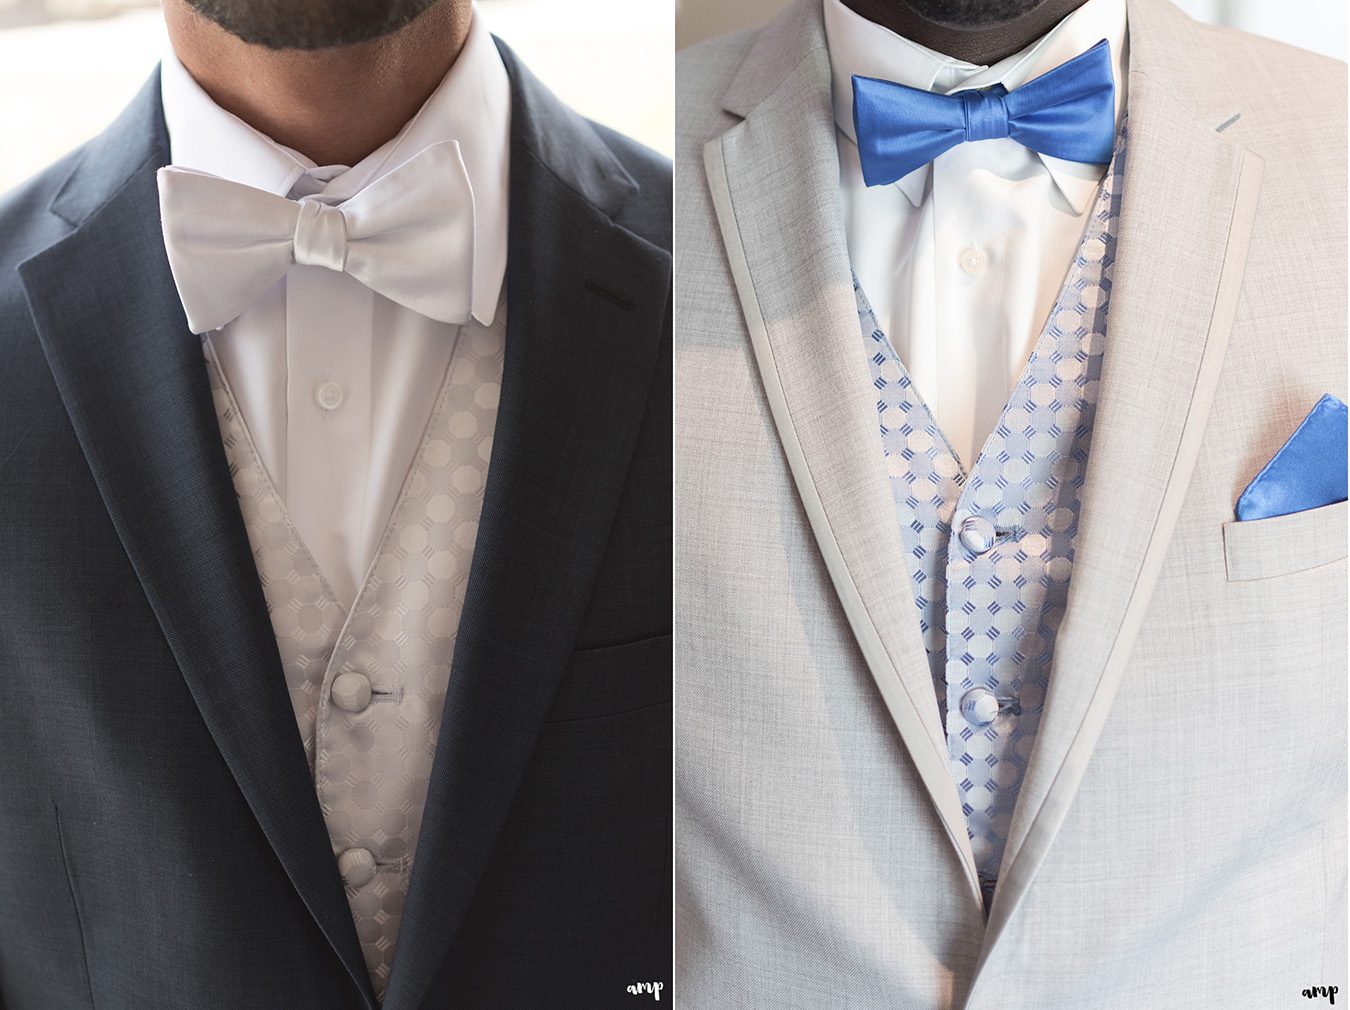 Groomsmen attire with blue and silver colors